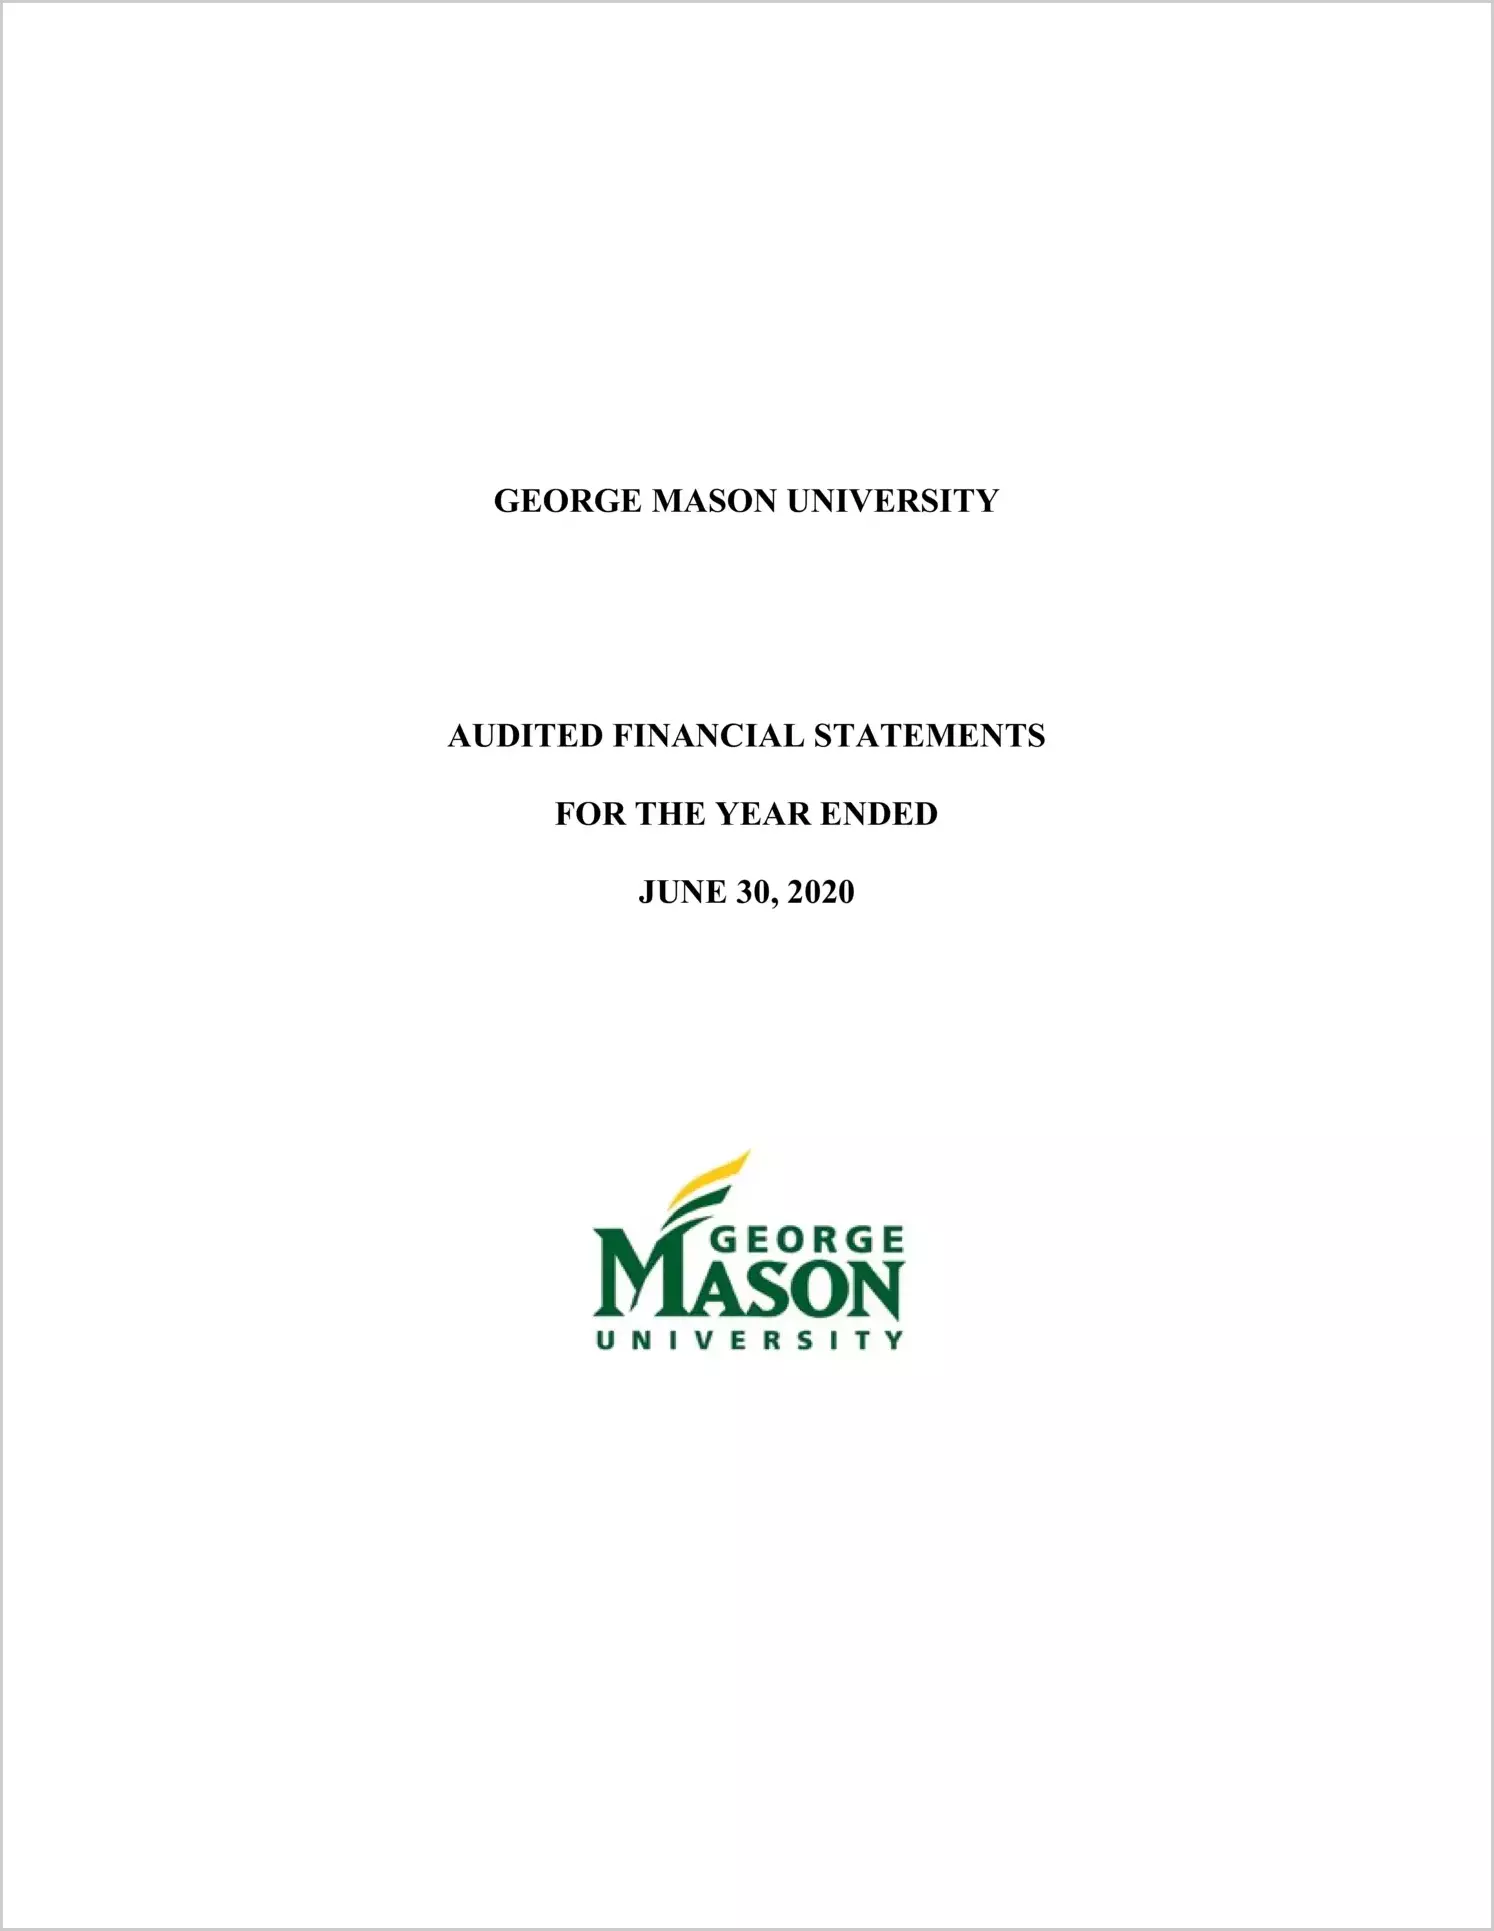 George Mason University Financial Statements for the year ended June 30, 2020